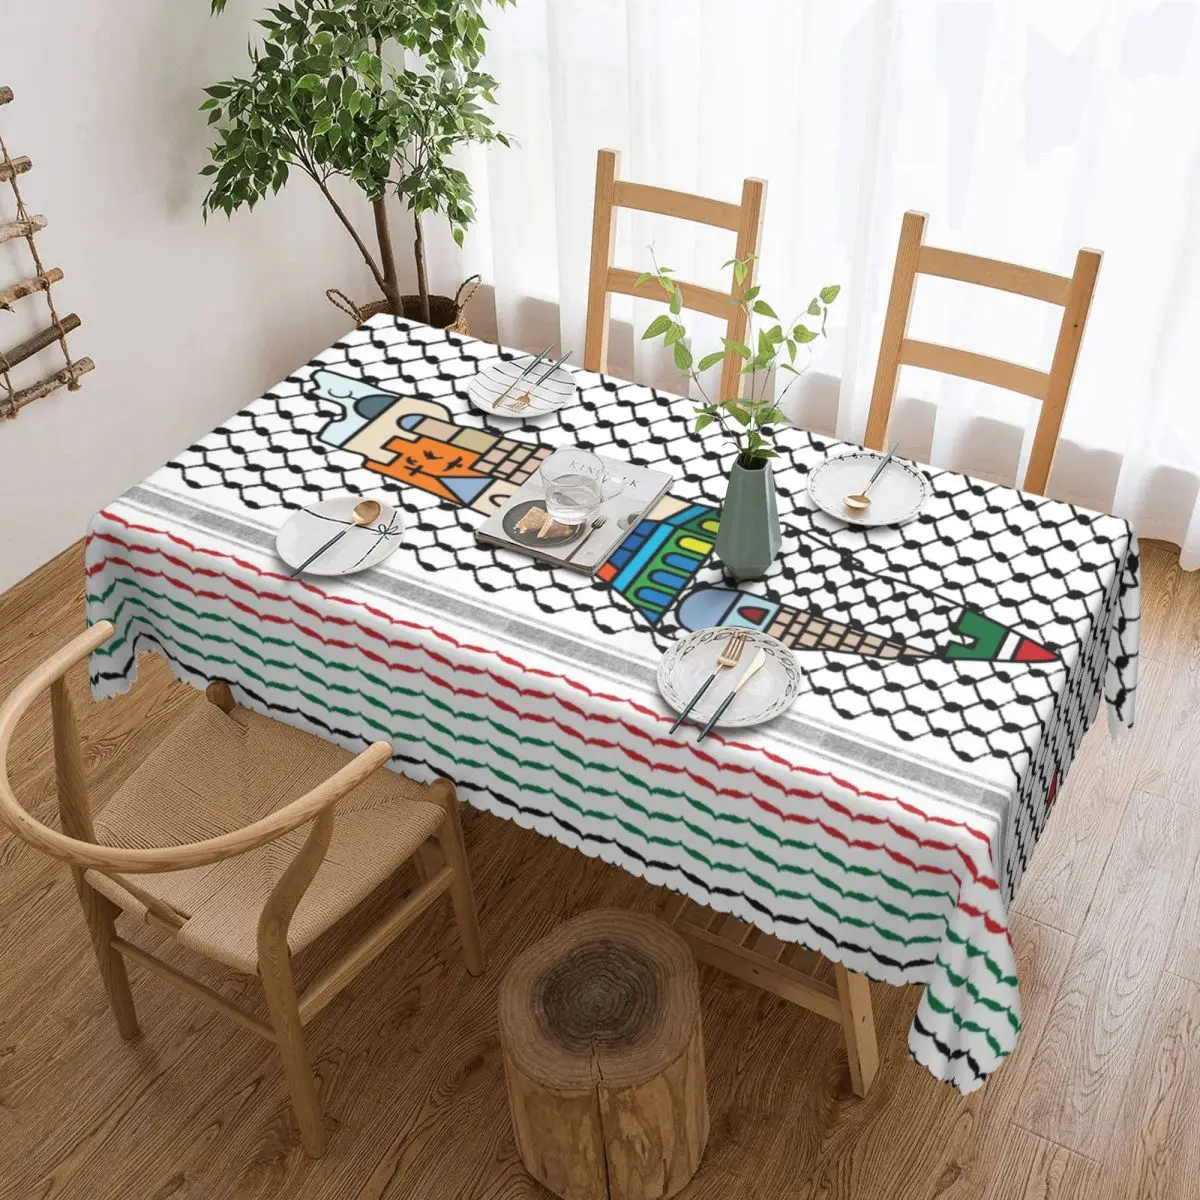 

Palestine Palestinian Map With Kufiya Hatta Pattern Tablecloth Rectangular Sacred Jerusalem Table Cover Cloth for Banquet